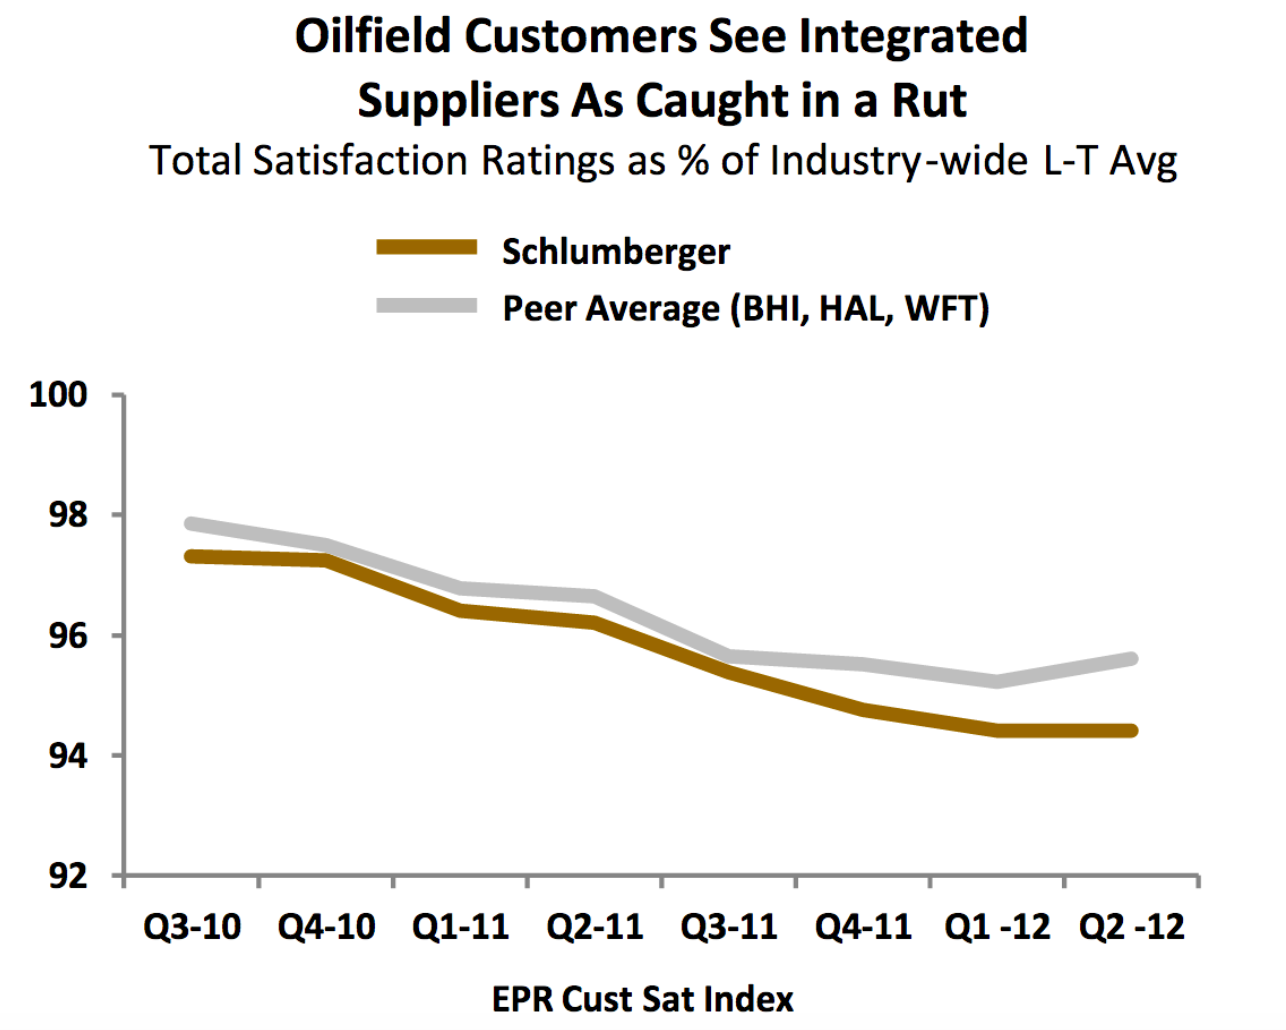 oilfield customers see integrated suppliers caught in a rut